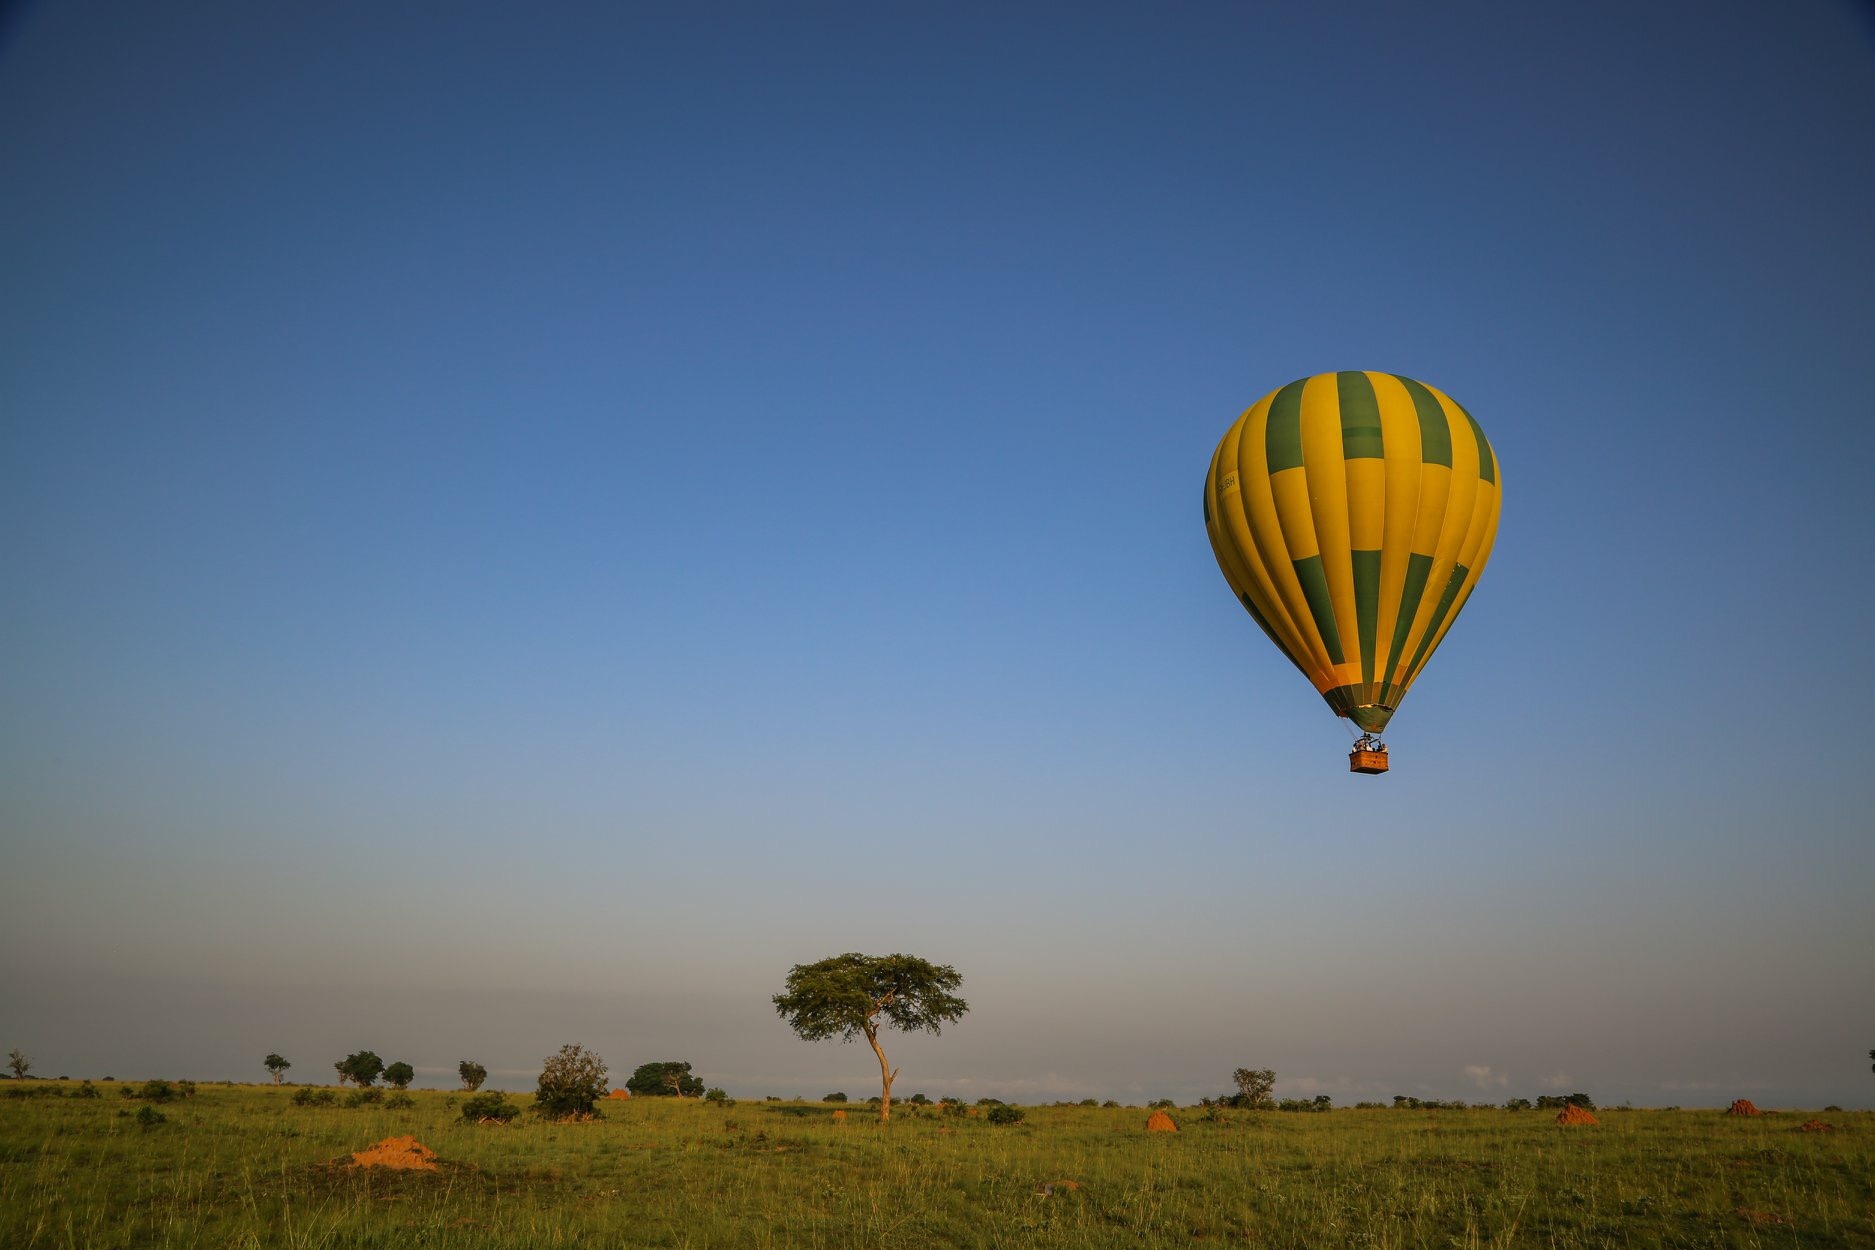 Here’s some facts about the Dream Balloon Game Drive tours in Uganda.